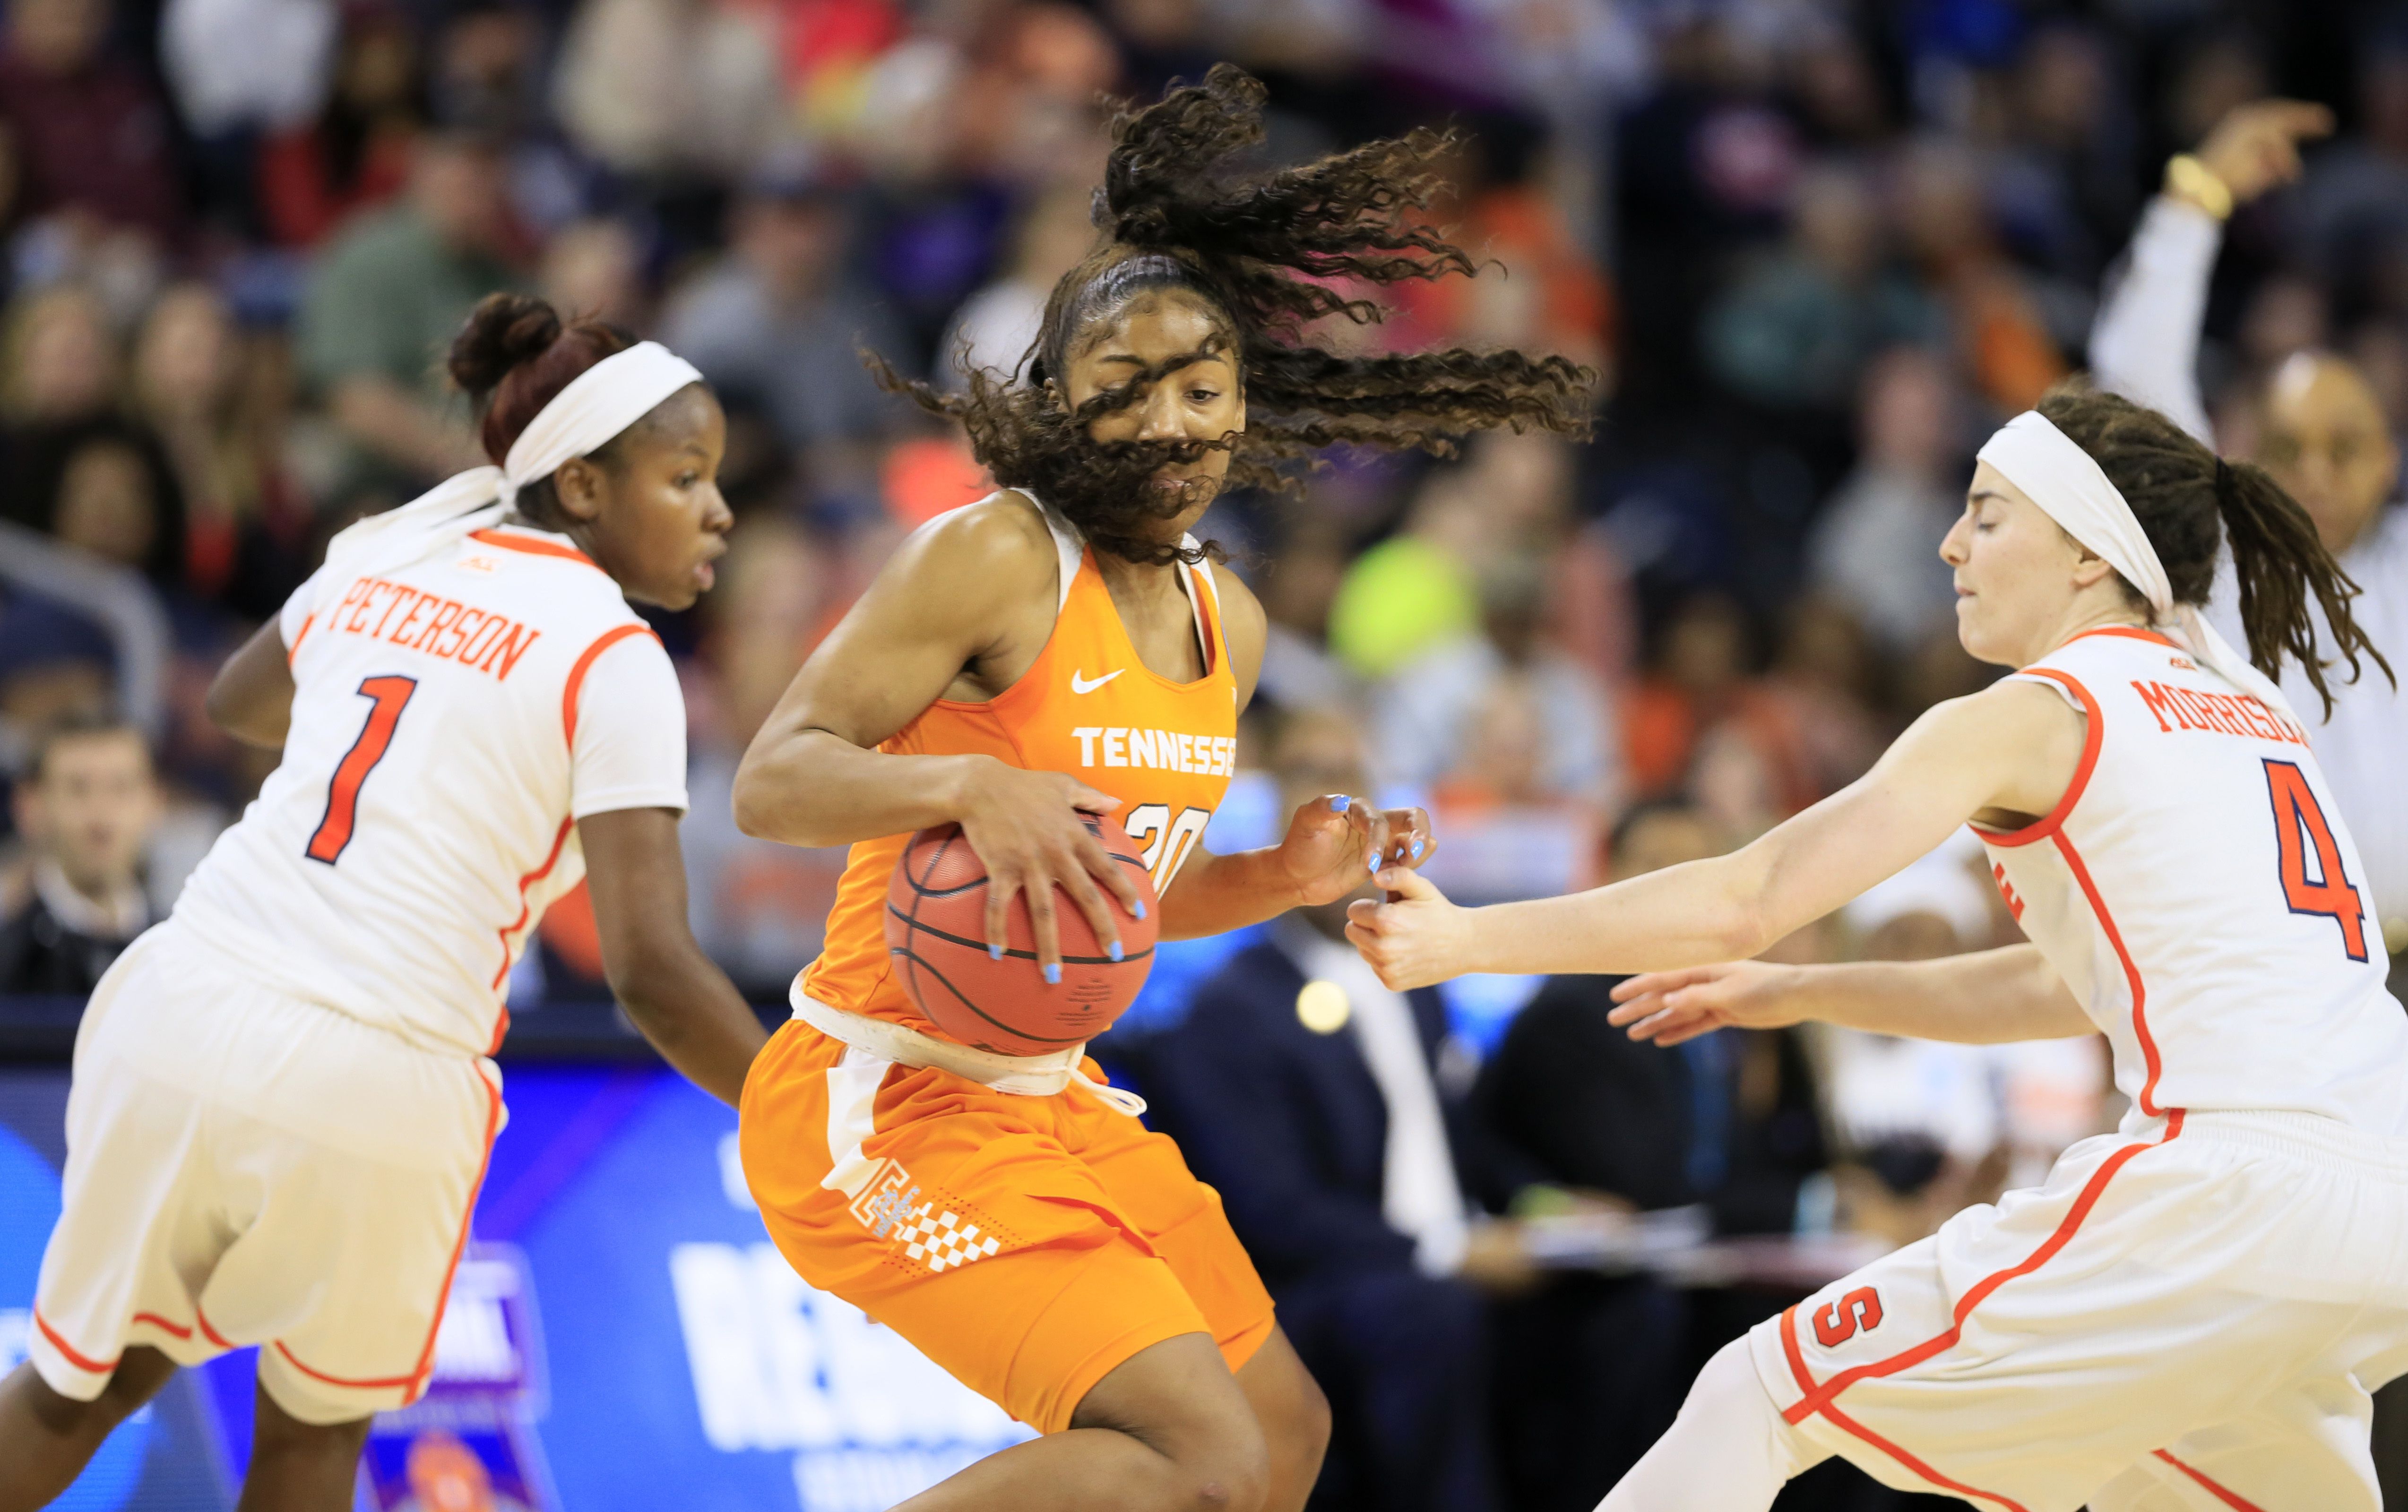 Syracuse women beat Lady Vols 89-67, head to 1st Final Four king5